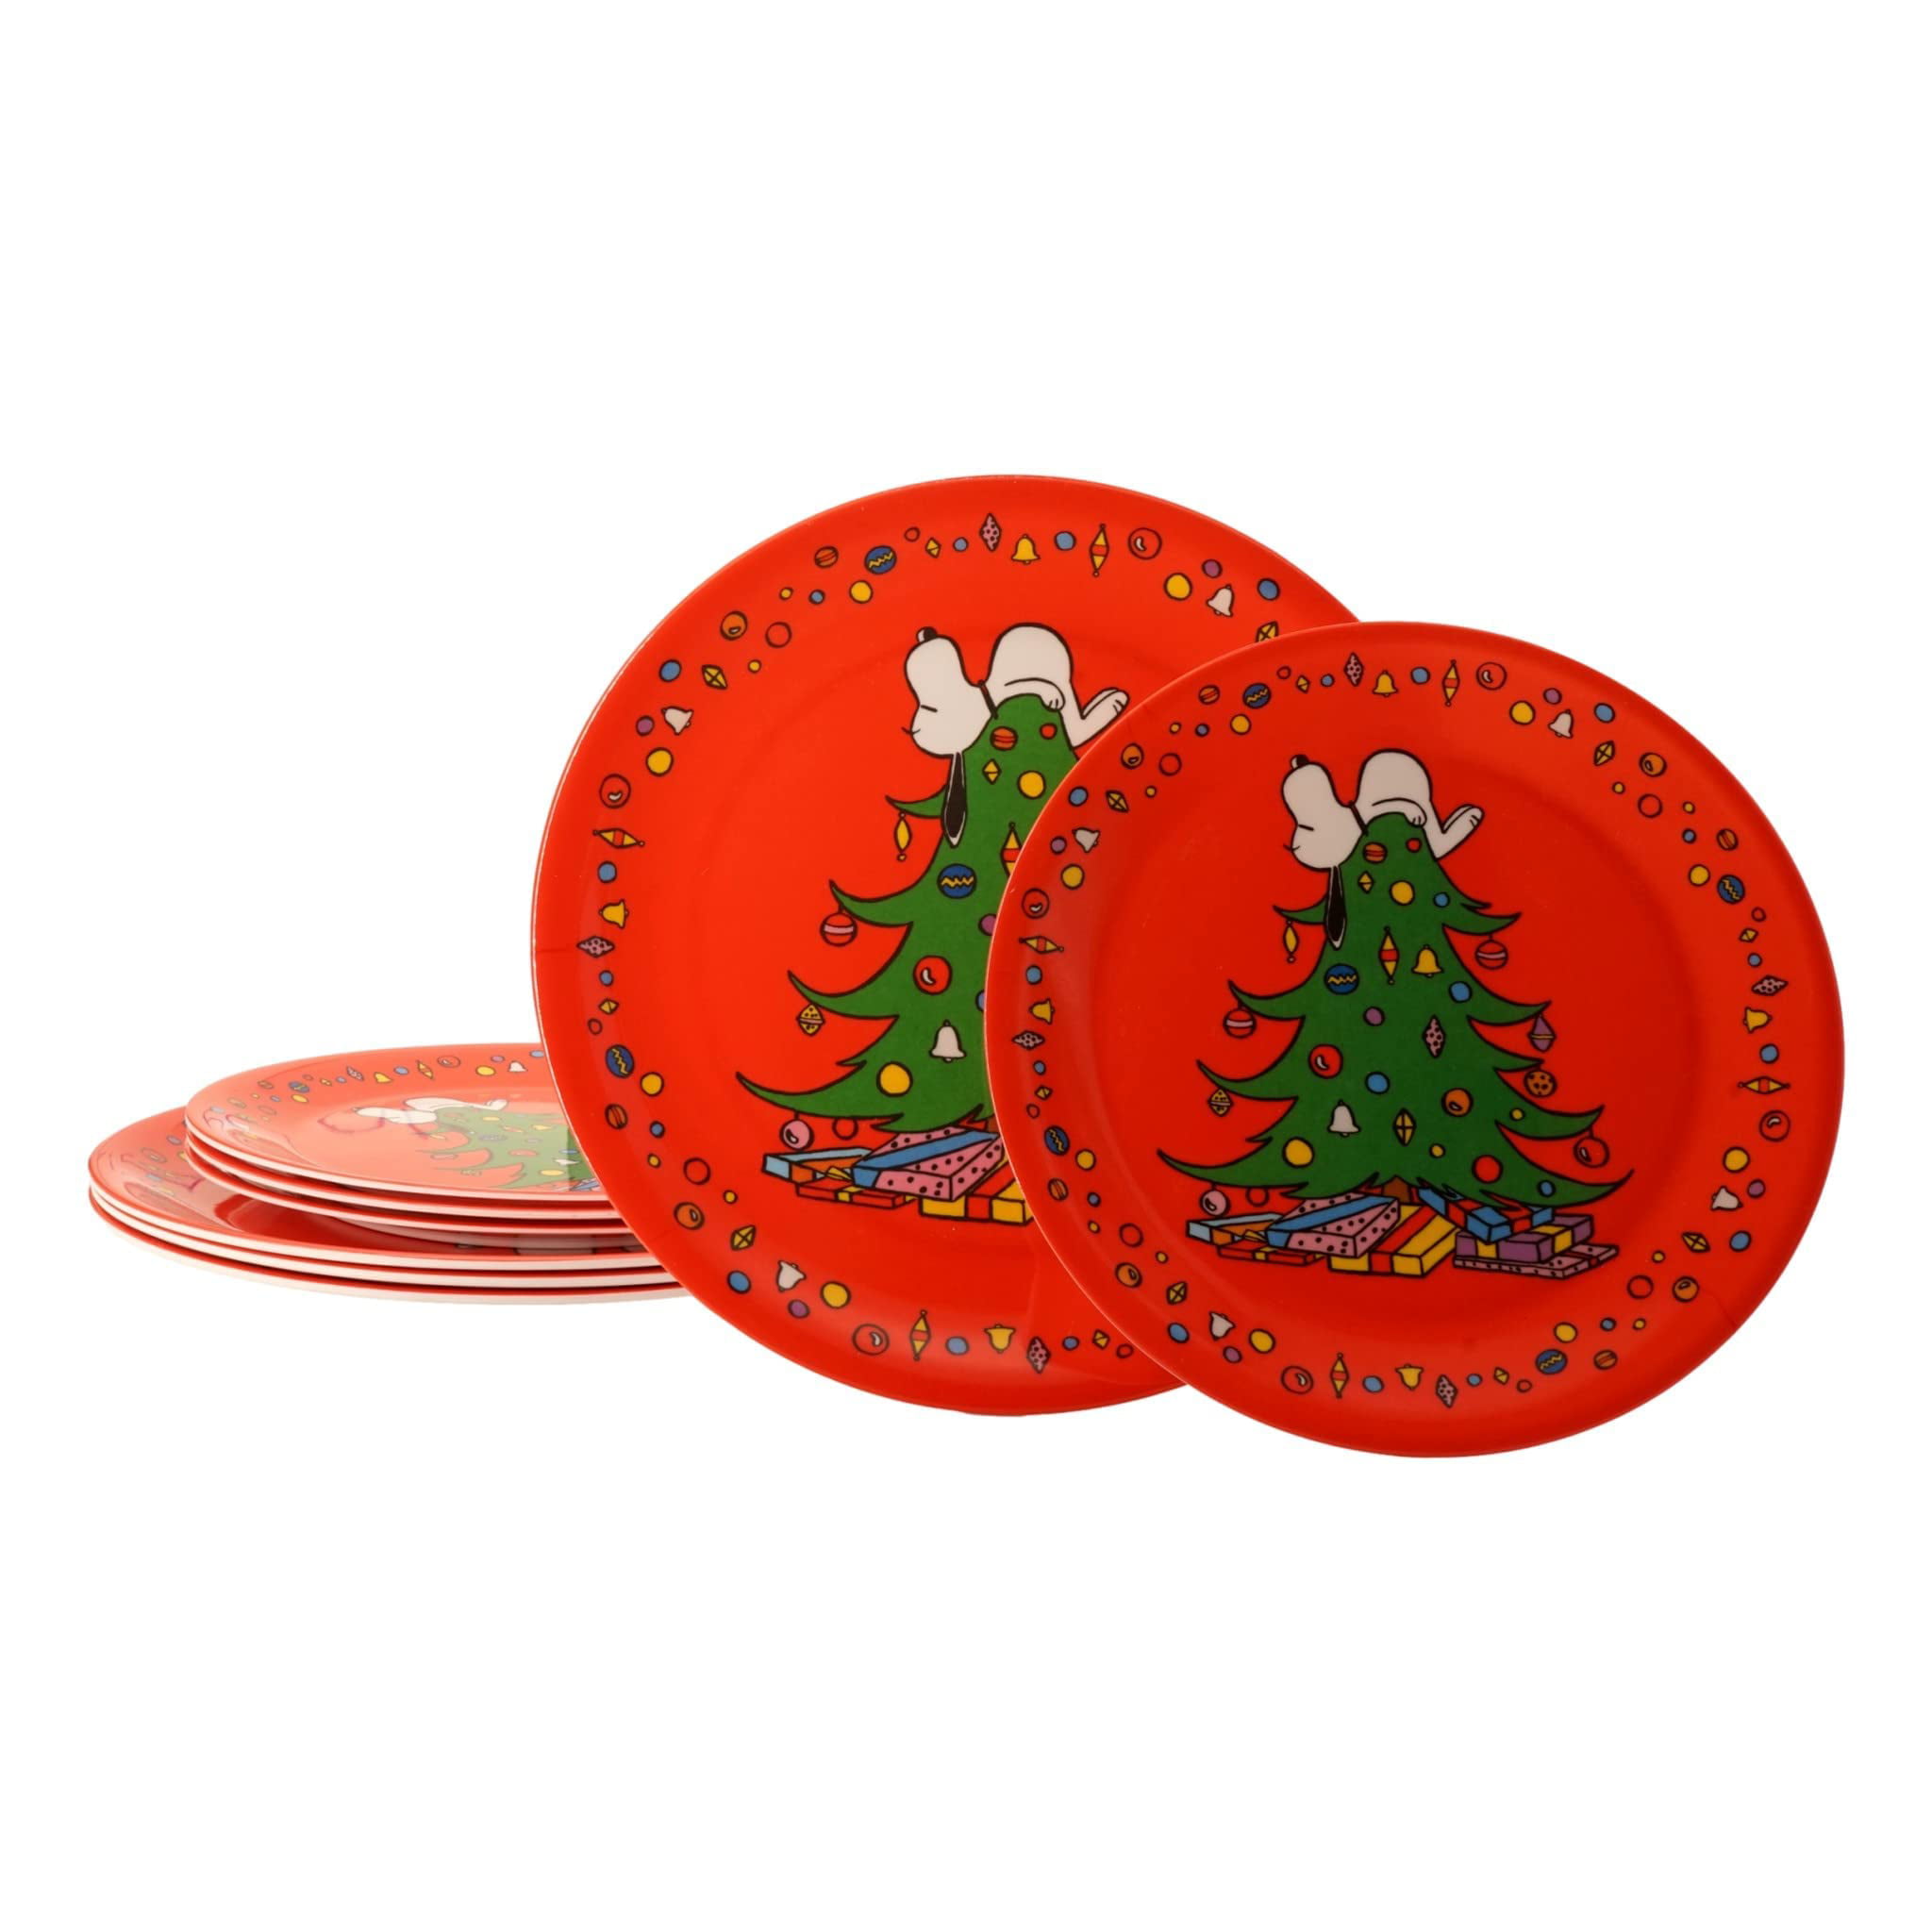 PIONEER WOMAN CHEERFUL ROSE DESIGN CHRISTMAS SHARING PLATE 12" RED Teal Set Of 2